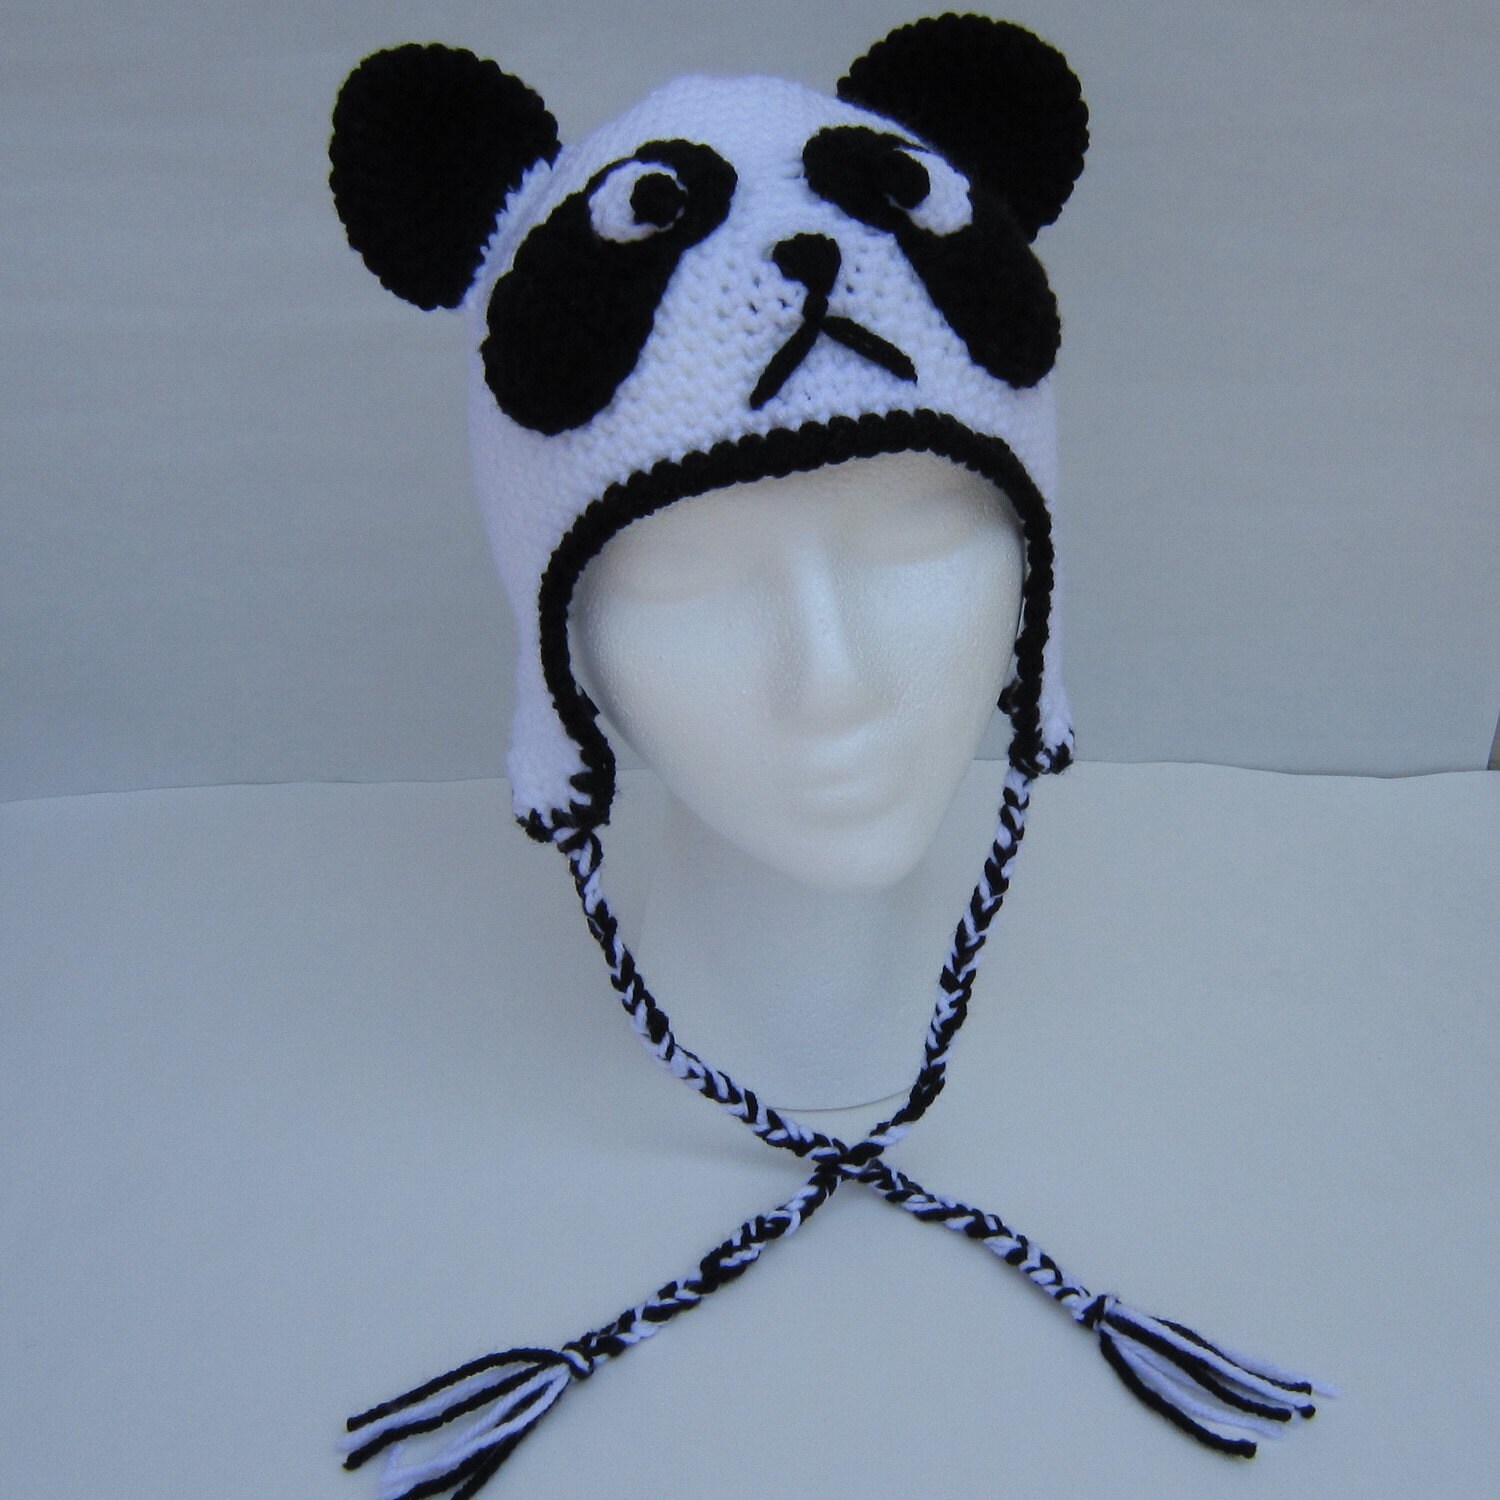 Sale That Makes Me A Sad Panda Hat South By Sunshinemonster